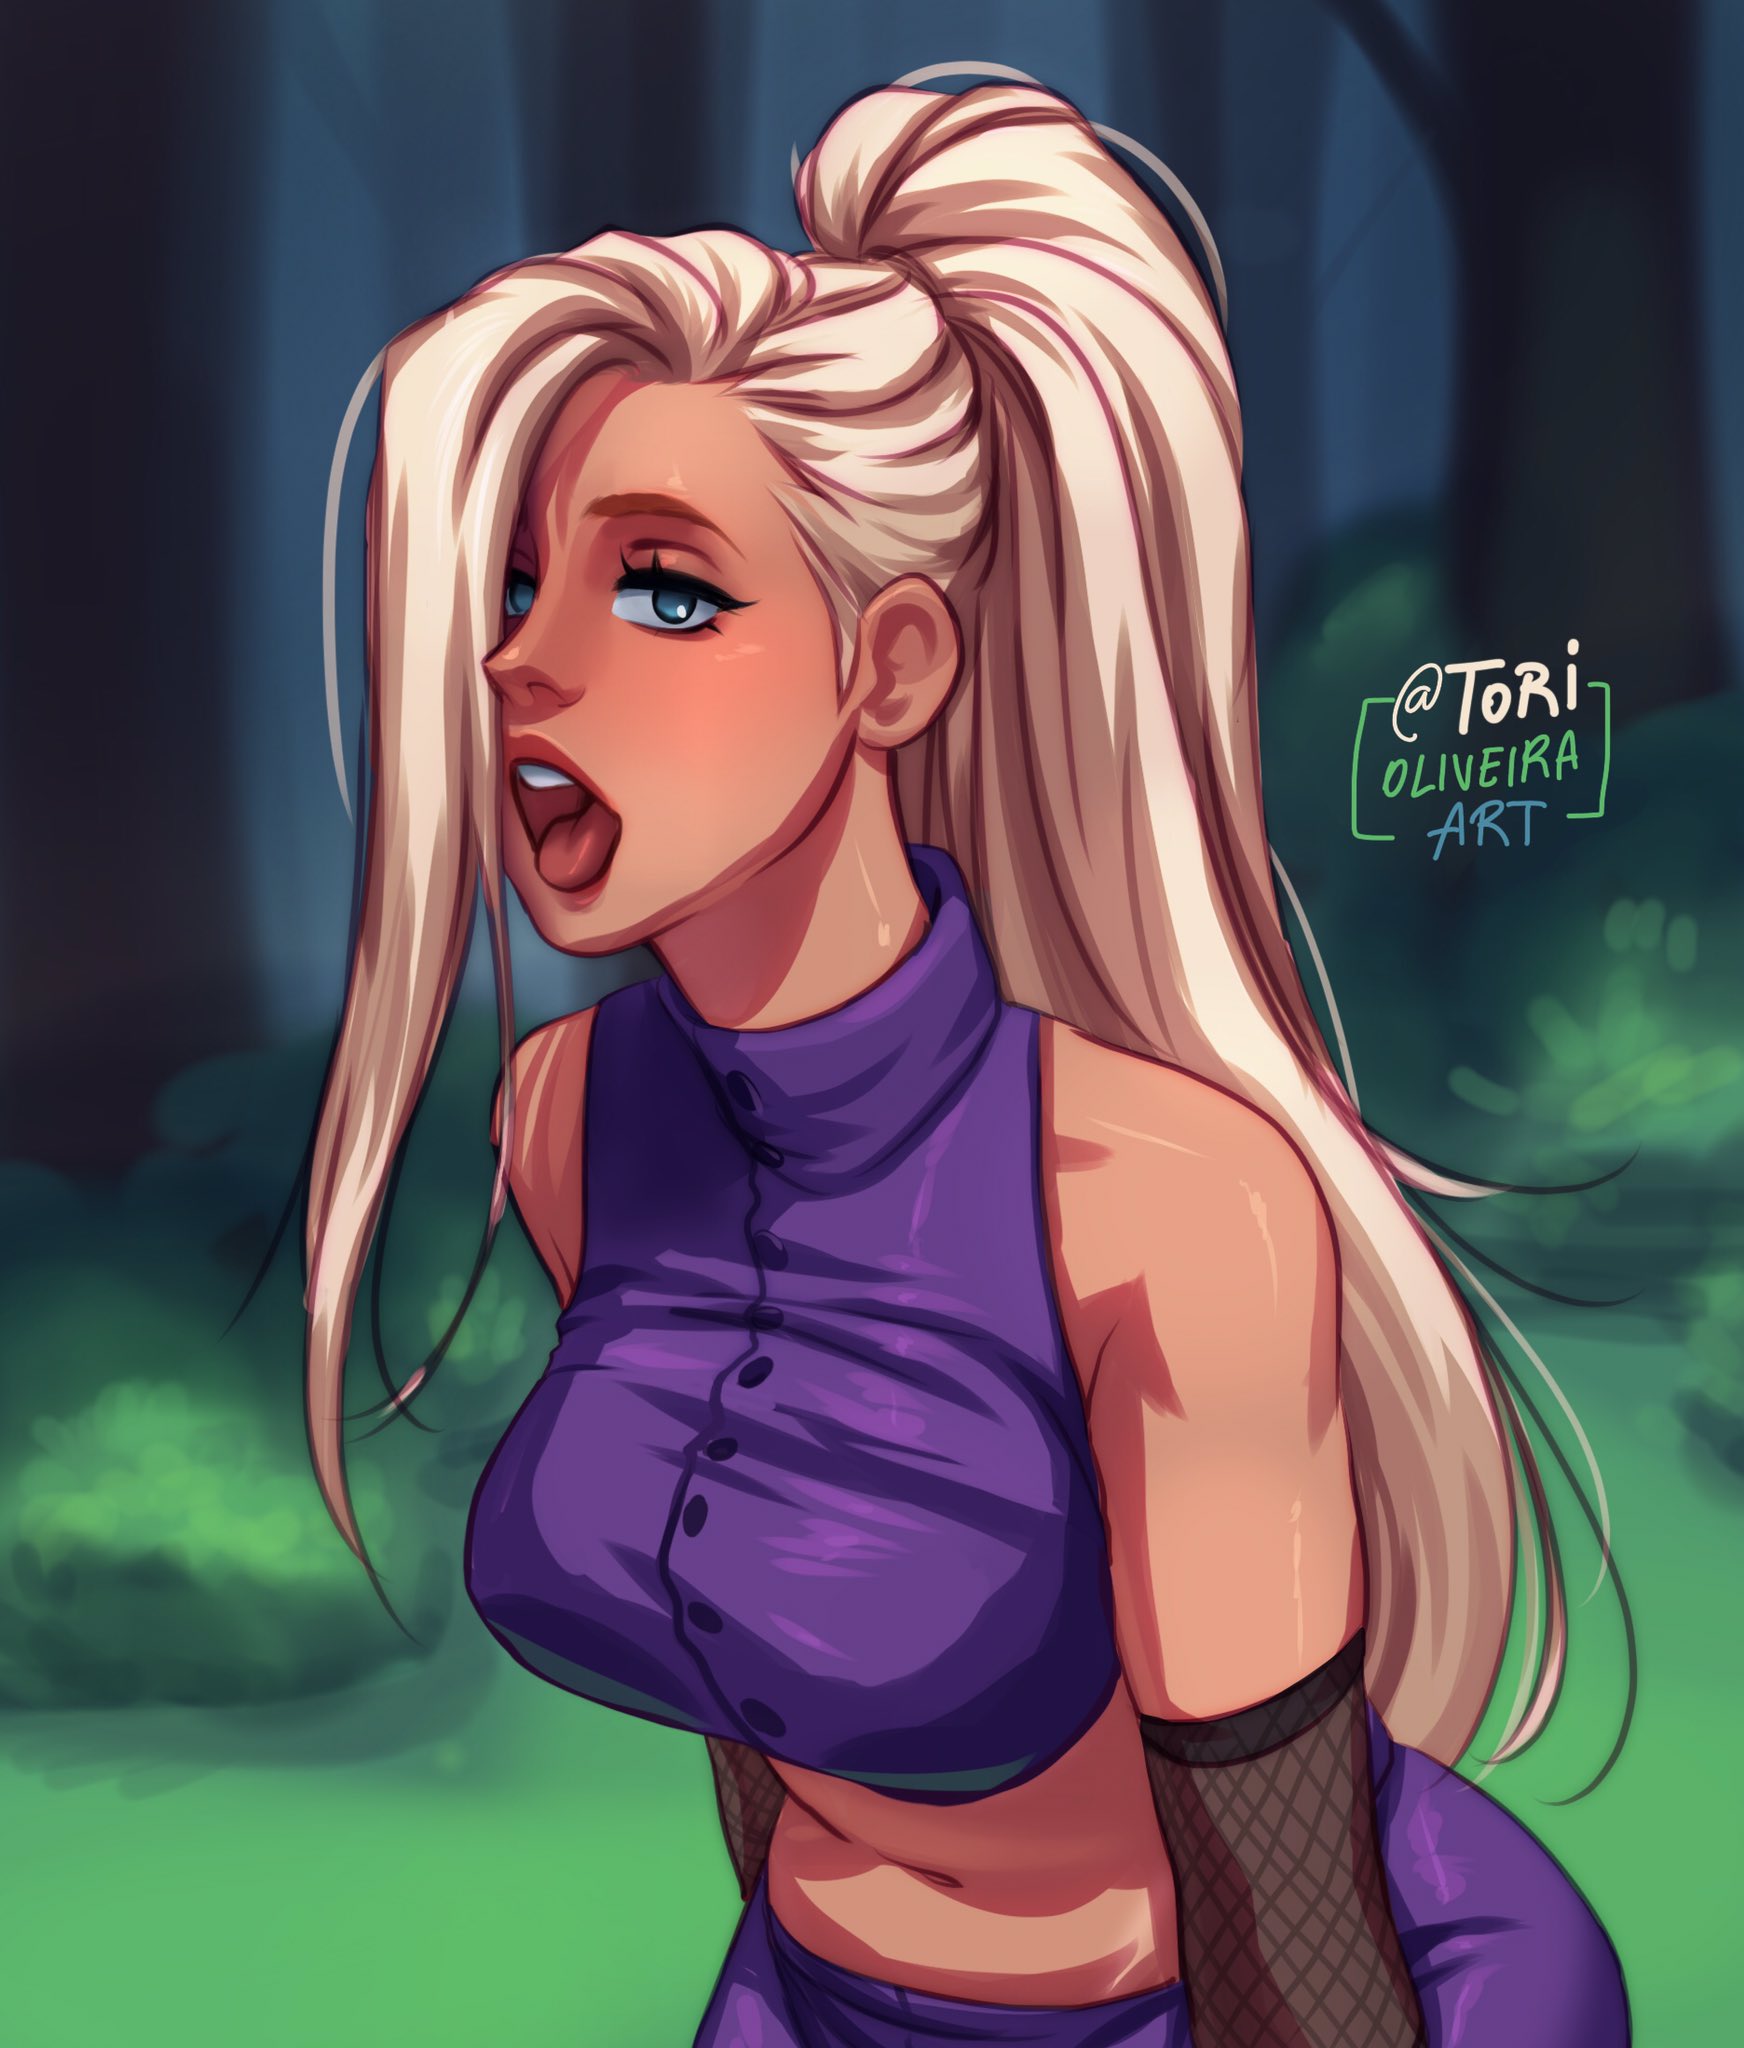 Tori 🍒 Bsky primasirot on X: Some *totally family friendly* Ino I did  last week, she's just doing her e-girl thingie 🥺 🔞 Alt Versions:  @SirotNSFW #ino #naruto #anime #manga #procreateart  t.cok2Smti2gn7 